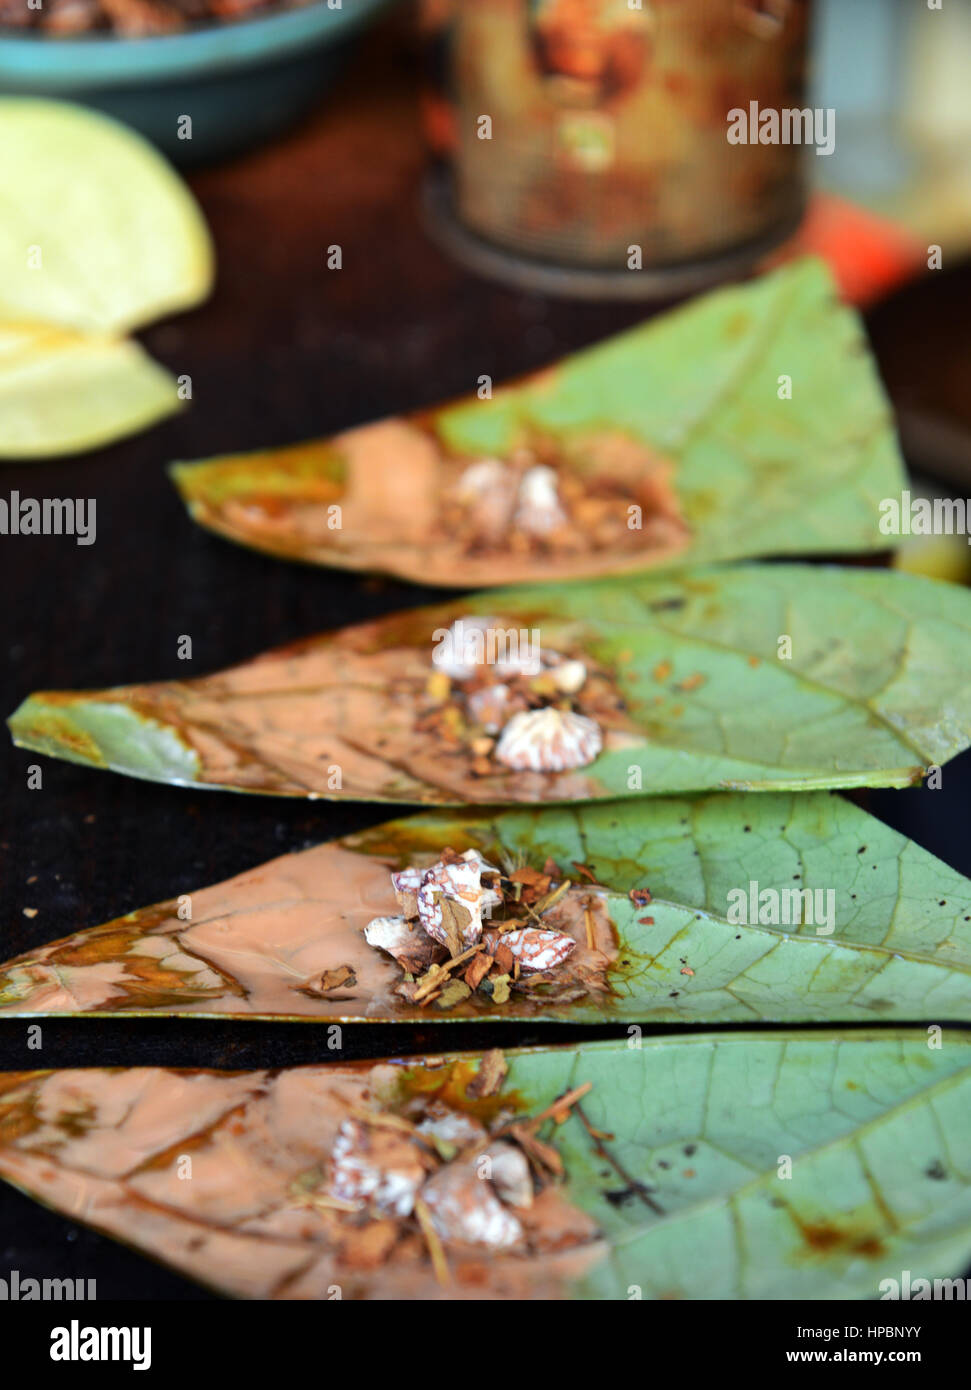 Preparation of Paan- An Asian / South Asian chewing stimulative made out of a Betel leaf with crushed Areca nut and spices inside. Stock Photo